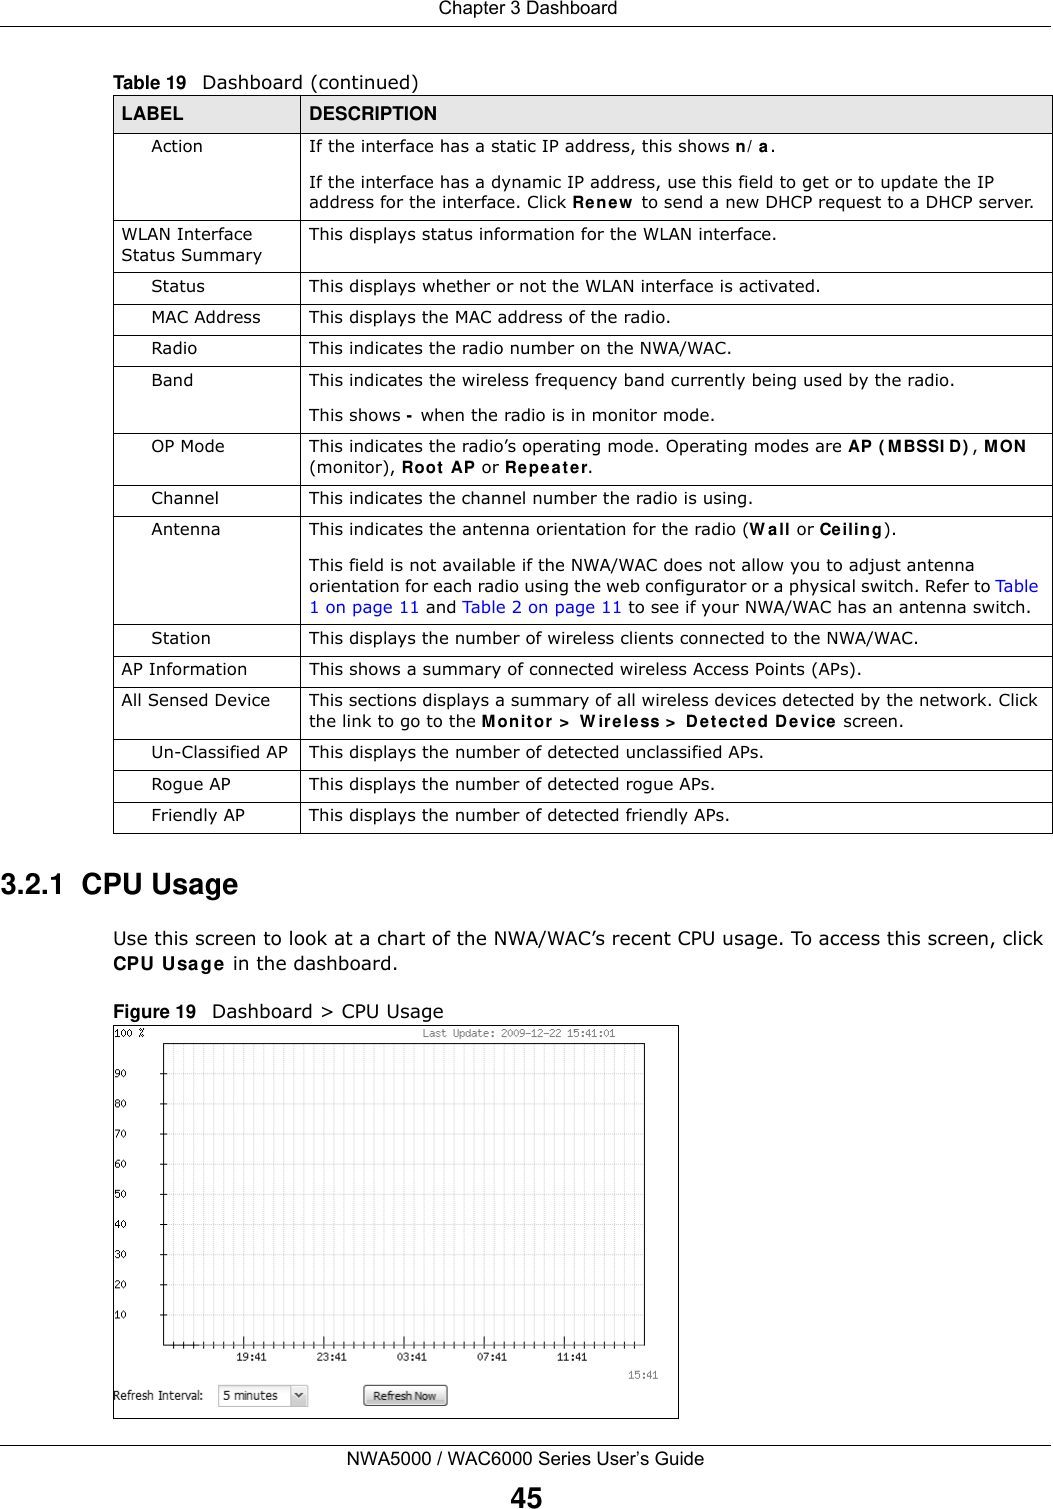  Chapter 3 DashboardNWA5000 / WAC6000 Series User’s Guide453.2.1  CPU UsageUse this screen to look at a chart of the NWA/WAC’s recent CPU usage. To access this screen, click CPU Usage in the dashboard.Figure 19   Dashboard &gt; CPU UsageAction If the interface has a static IP address, this shows n/a. If the interface has a dynamic IP address, use this field to get or to update the IP address for the interface. Click Renew to send a new DHCP request to a DHCP server. WLAN Interface Status SummaryThis displays status information for the WLAN interface.Status This displays whether or not the WLAN interface is activated.MAC Address This displays the MAC address of the radio.Radio This indicates the radio number on the NWA/WAC.Band This indicates the wireless frequency band currently being used by the radio. This shows - when the radio is in monitor mode.OP Mode This indicates the radio’s operating mode. Operating modes are AP (MBSSID), MON (monitor), Root AP or Repeater.Channel This indicates the channel number the radio is using.Antenna This indicates the antenna orientation for the radio (Wall or Ceiling).This field is not available if the NWA/WAC does not allow you to adjust antenna orientation for each radio using the web configurator or a physical switch. Refer to Table 1 on page 11 and Table 2 on page 11 to see if your NWA/WAC has an antenna switch.Station This displays the number of wireless clients connected to the NWA/WAC.AP Information This shows a summary of connected wireless Access Points (APs). All Sensed Device This sections displays a summary of all wireless devices detected by the network. Click the link to go to the Monitor &gt; Wireless &gt; Detected Device screen.Un-Classified AP This displays the number of detected unclassified APs.Rogue AP This displays the number of detected rogue APs.Friendly AP This displays the number of detected friendly APs.Table 19   Dashboard (continued)LABEL DESCRIPTION